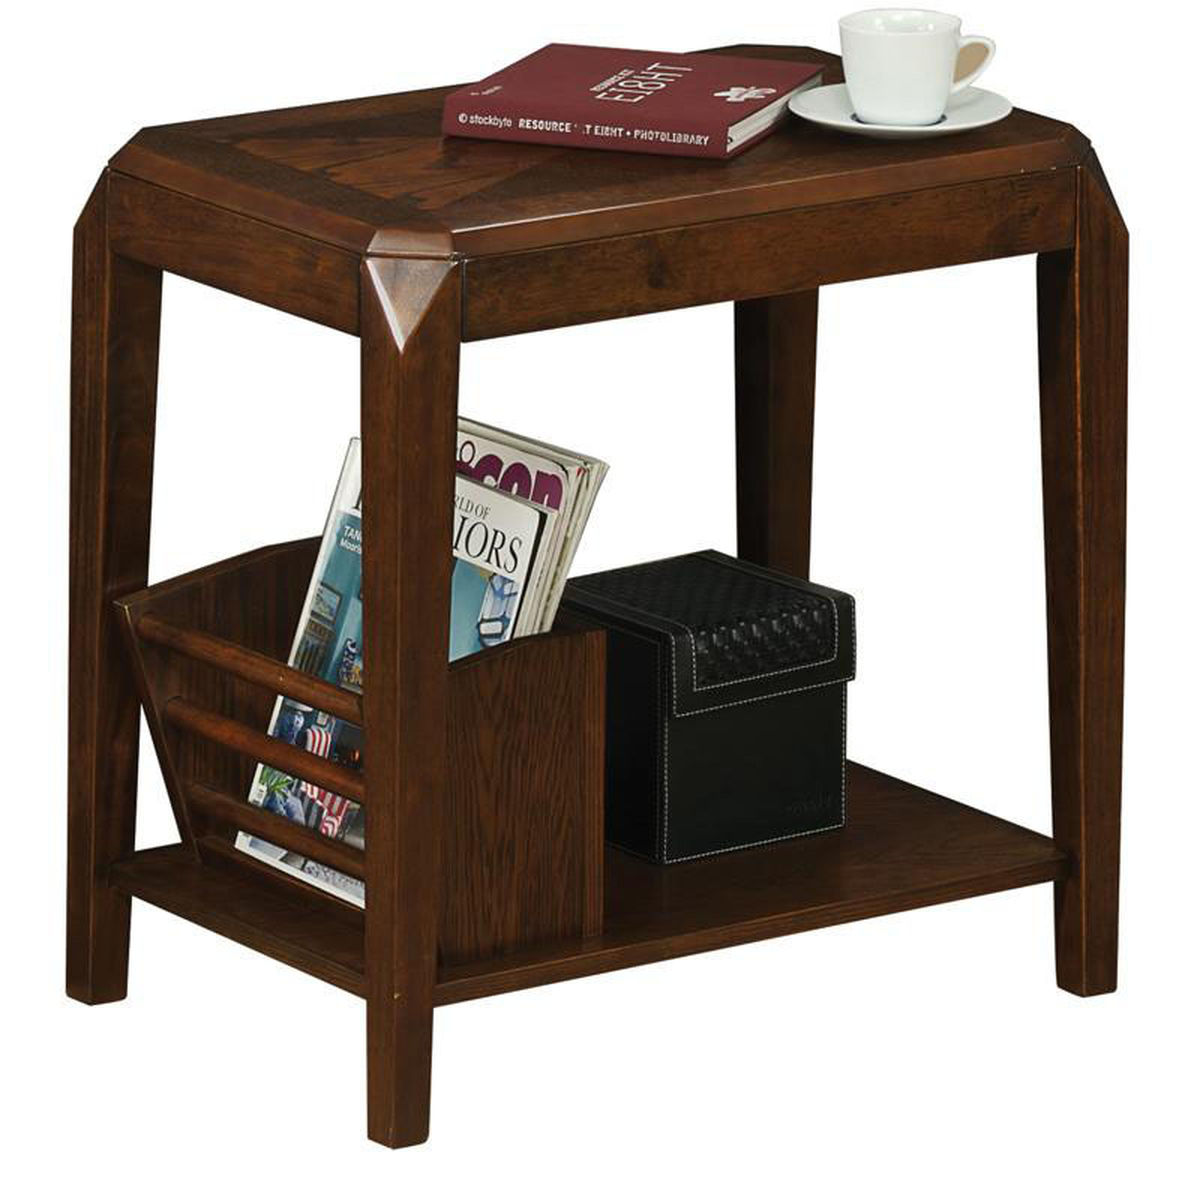 brown oak accent table bizchair monarch specialties msp main corner with storage our beveled shelf now target mirrored side drawer battery operated lamps dinner decor ideas oval